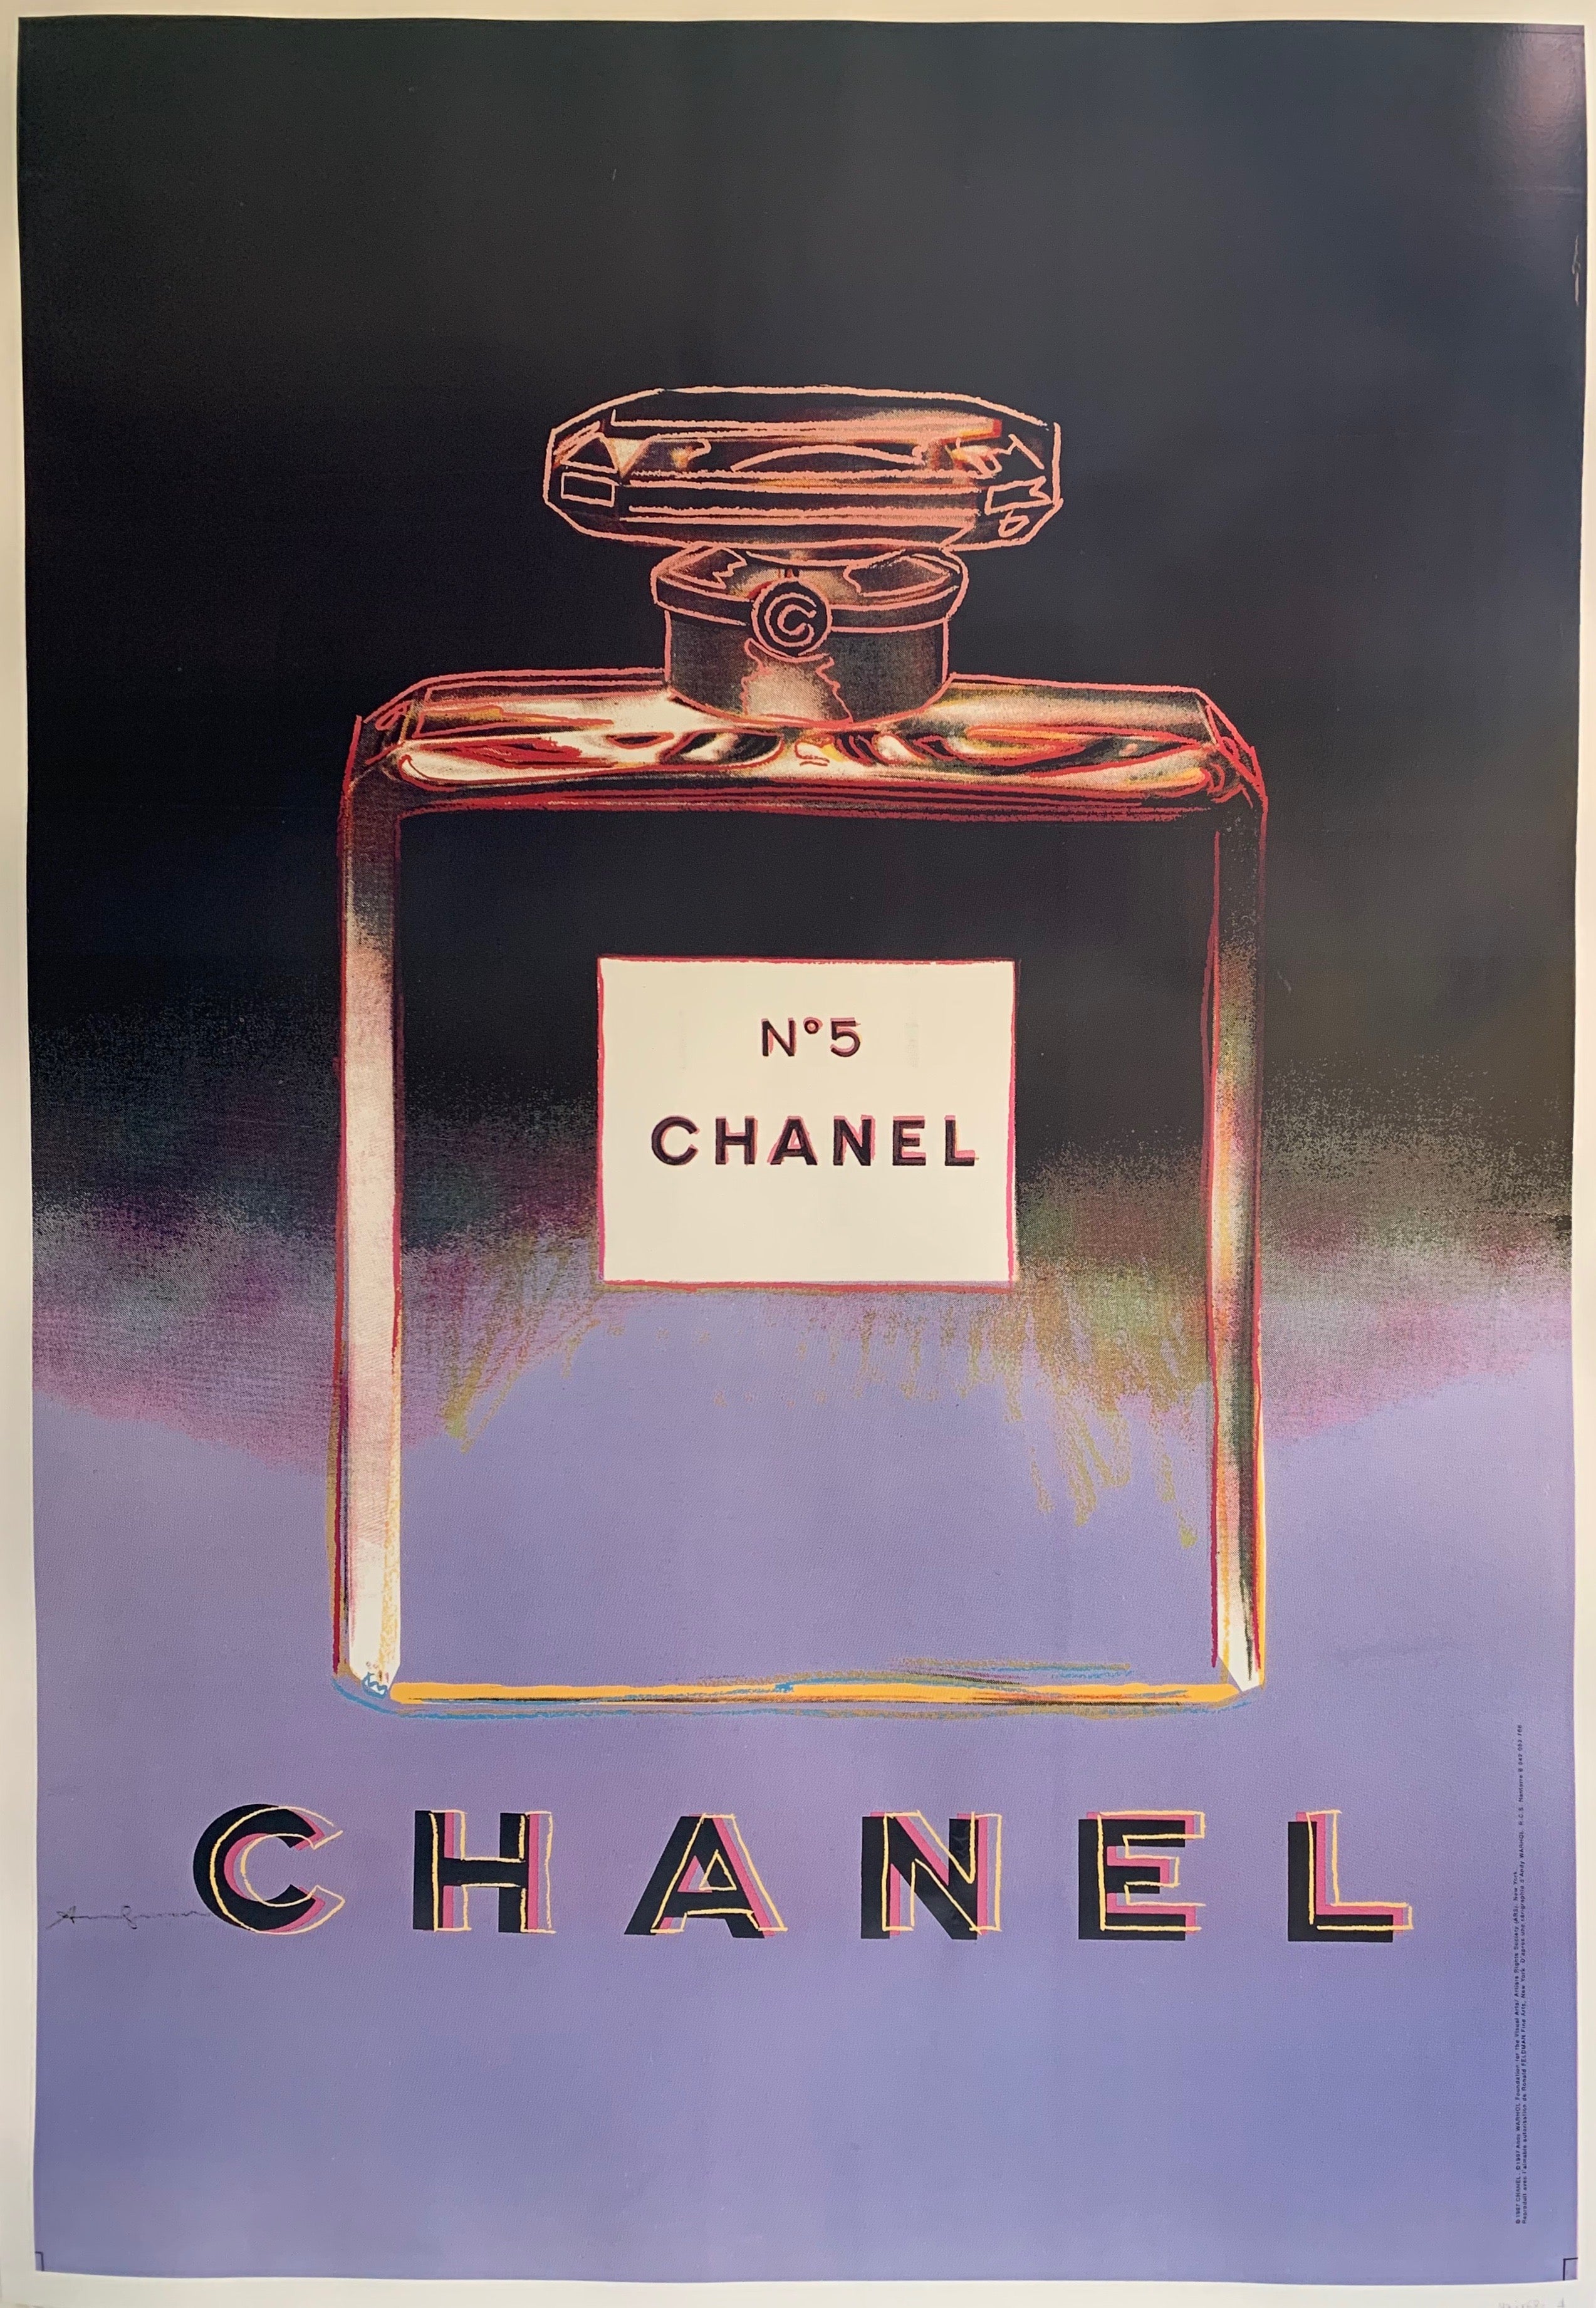 chanel red perfume bottle